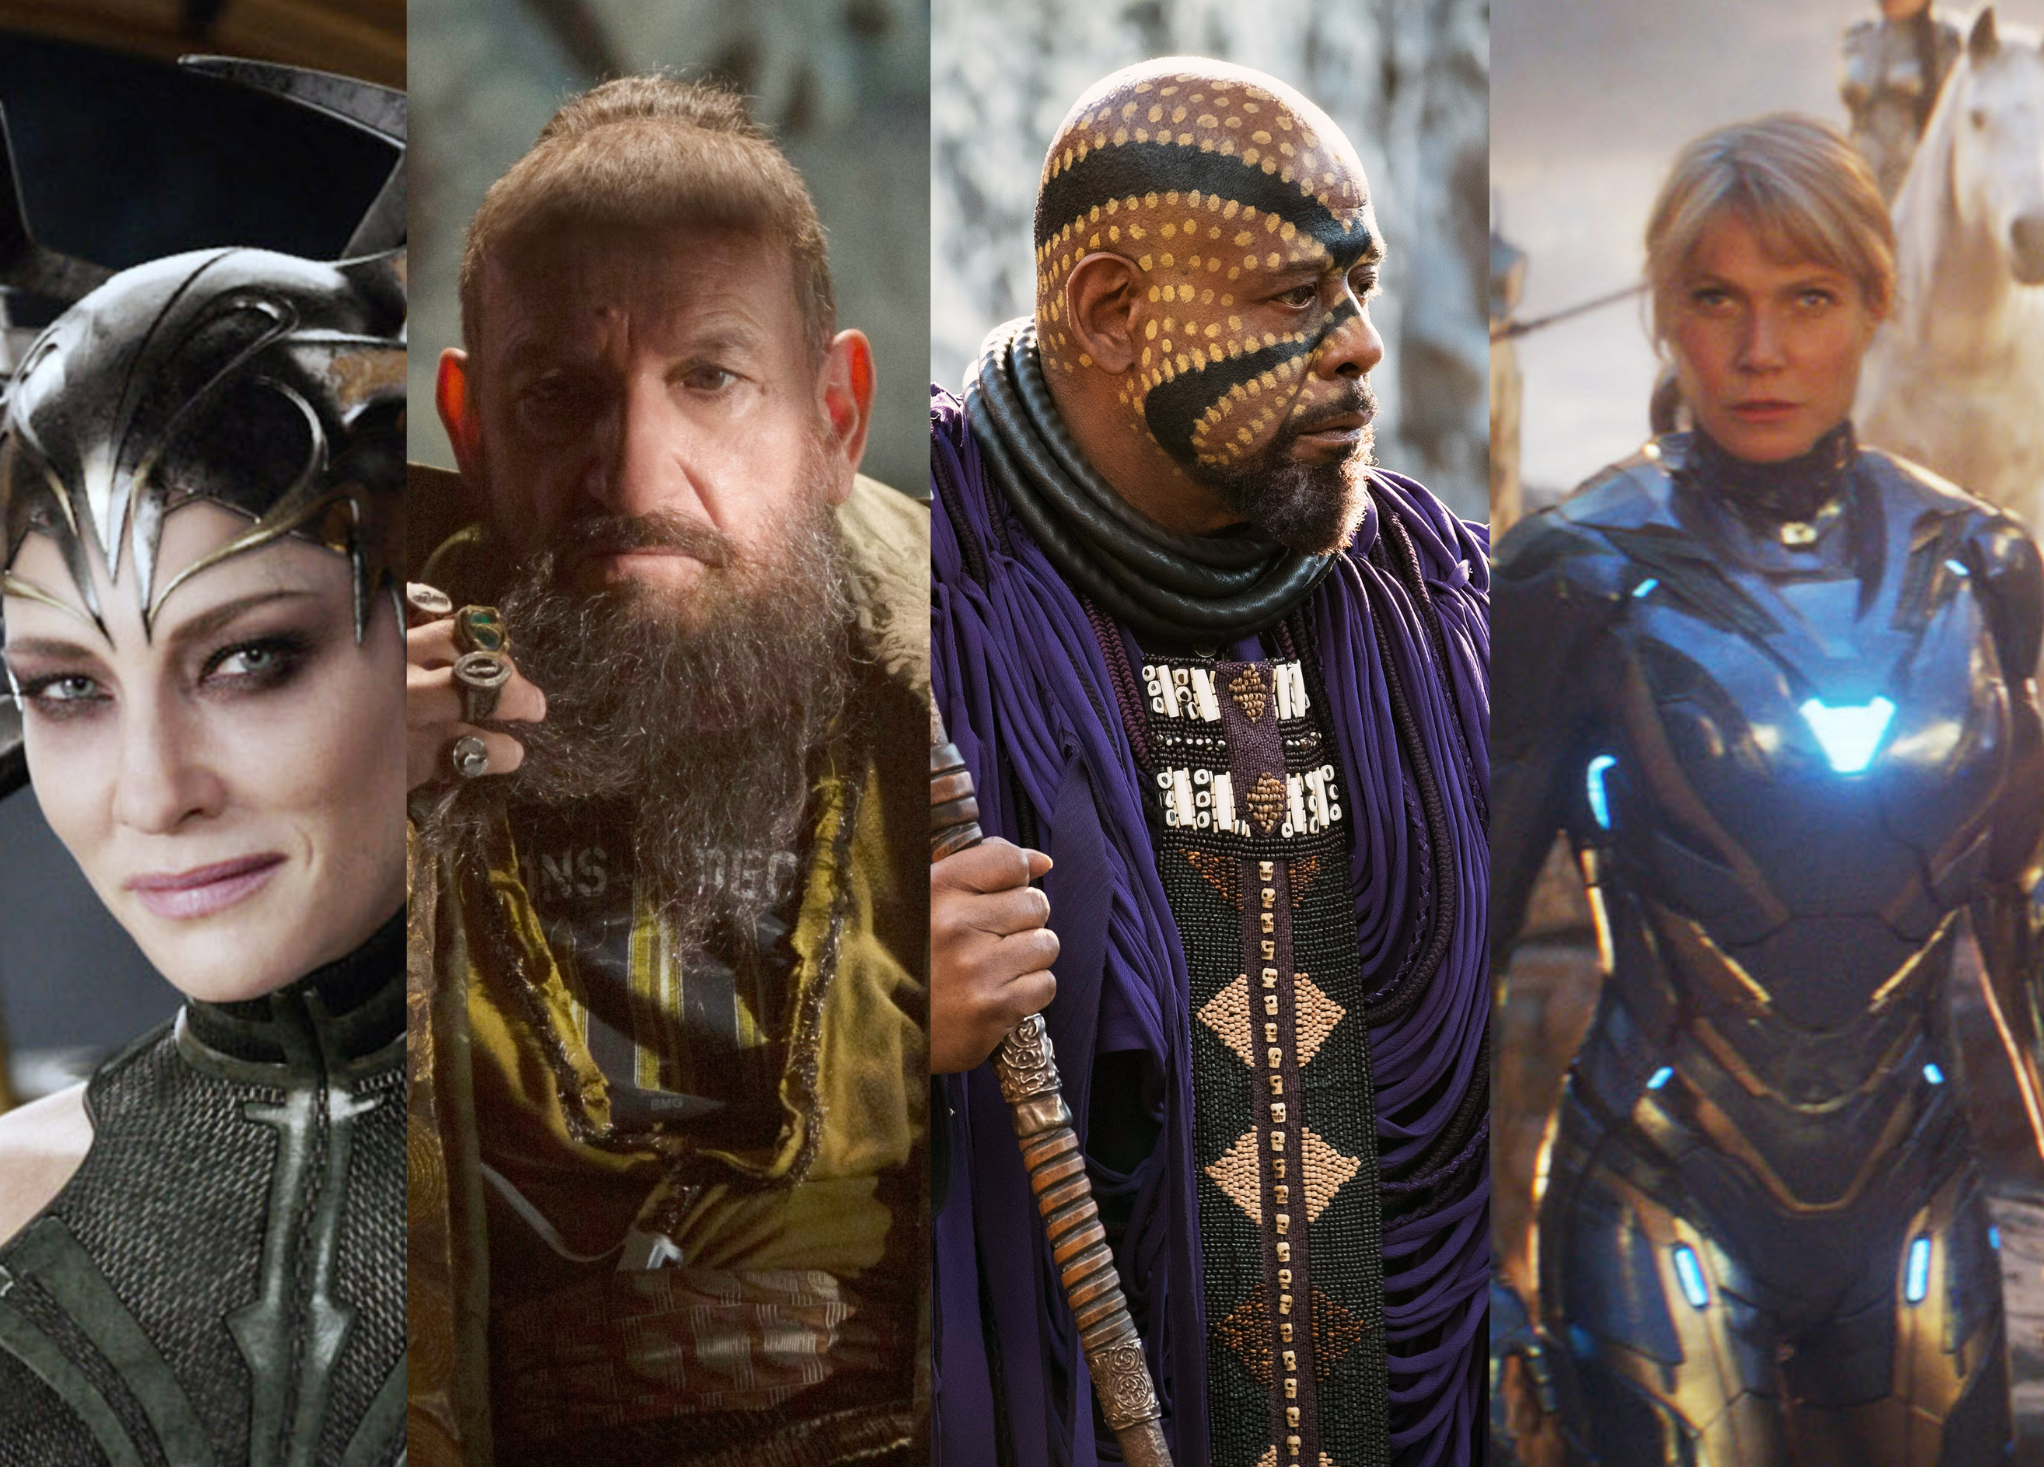 Four MCU film characters from left to right: Hela, Trevor Slattery, Zuri, and Pepper Potts